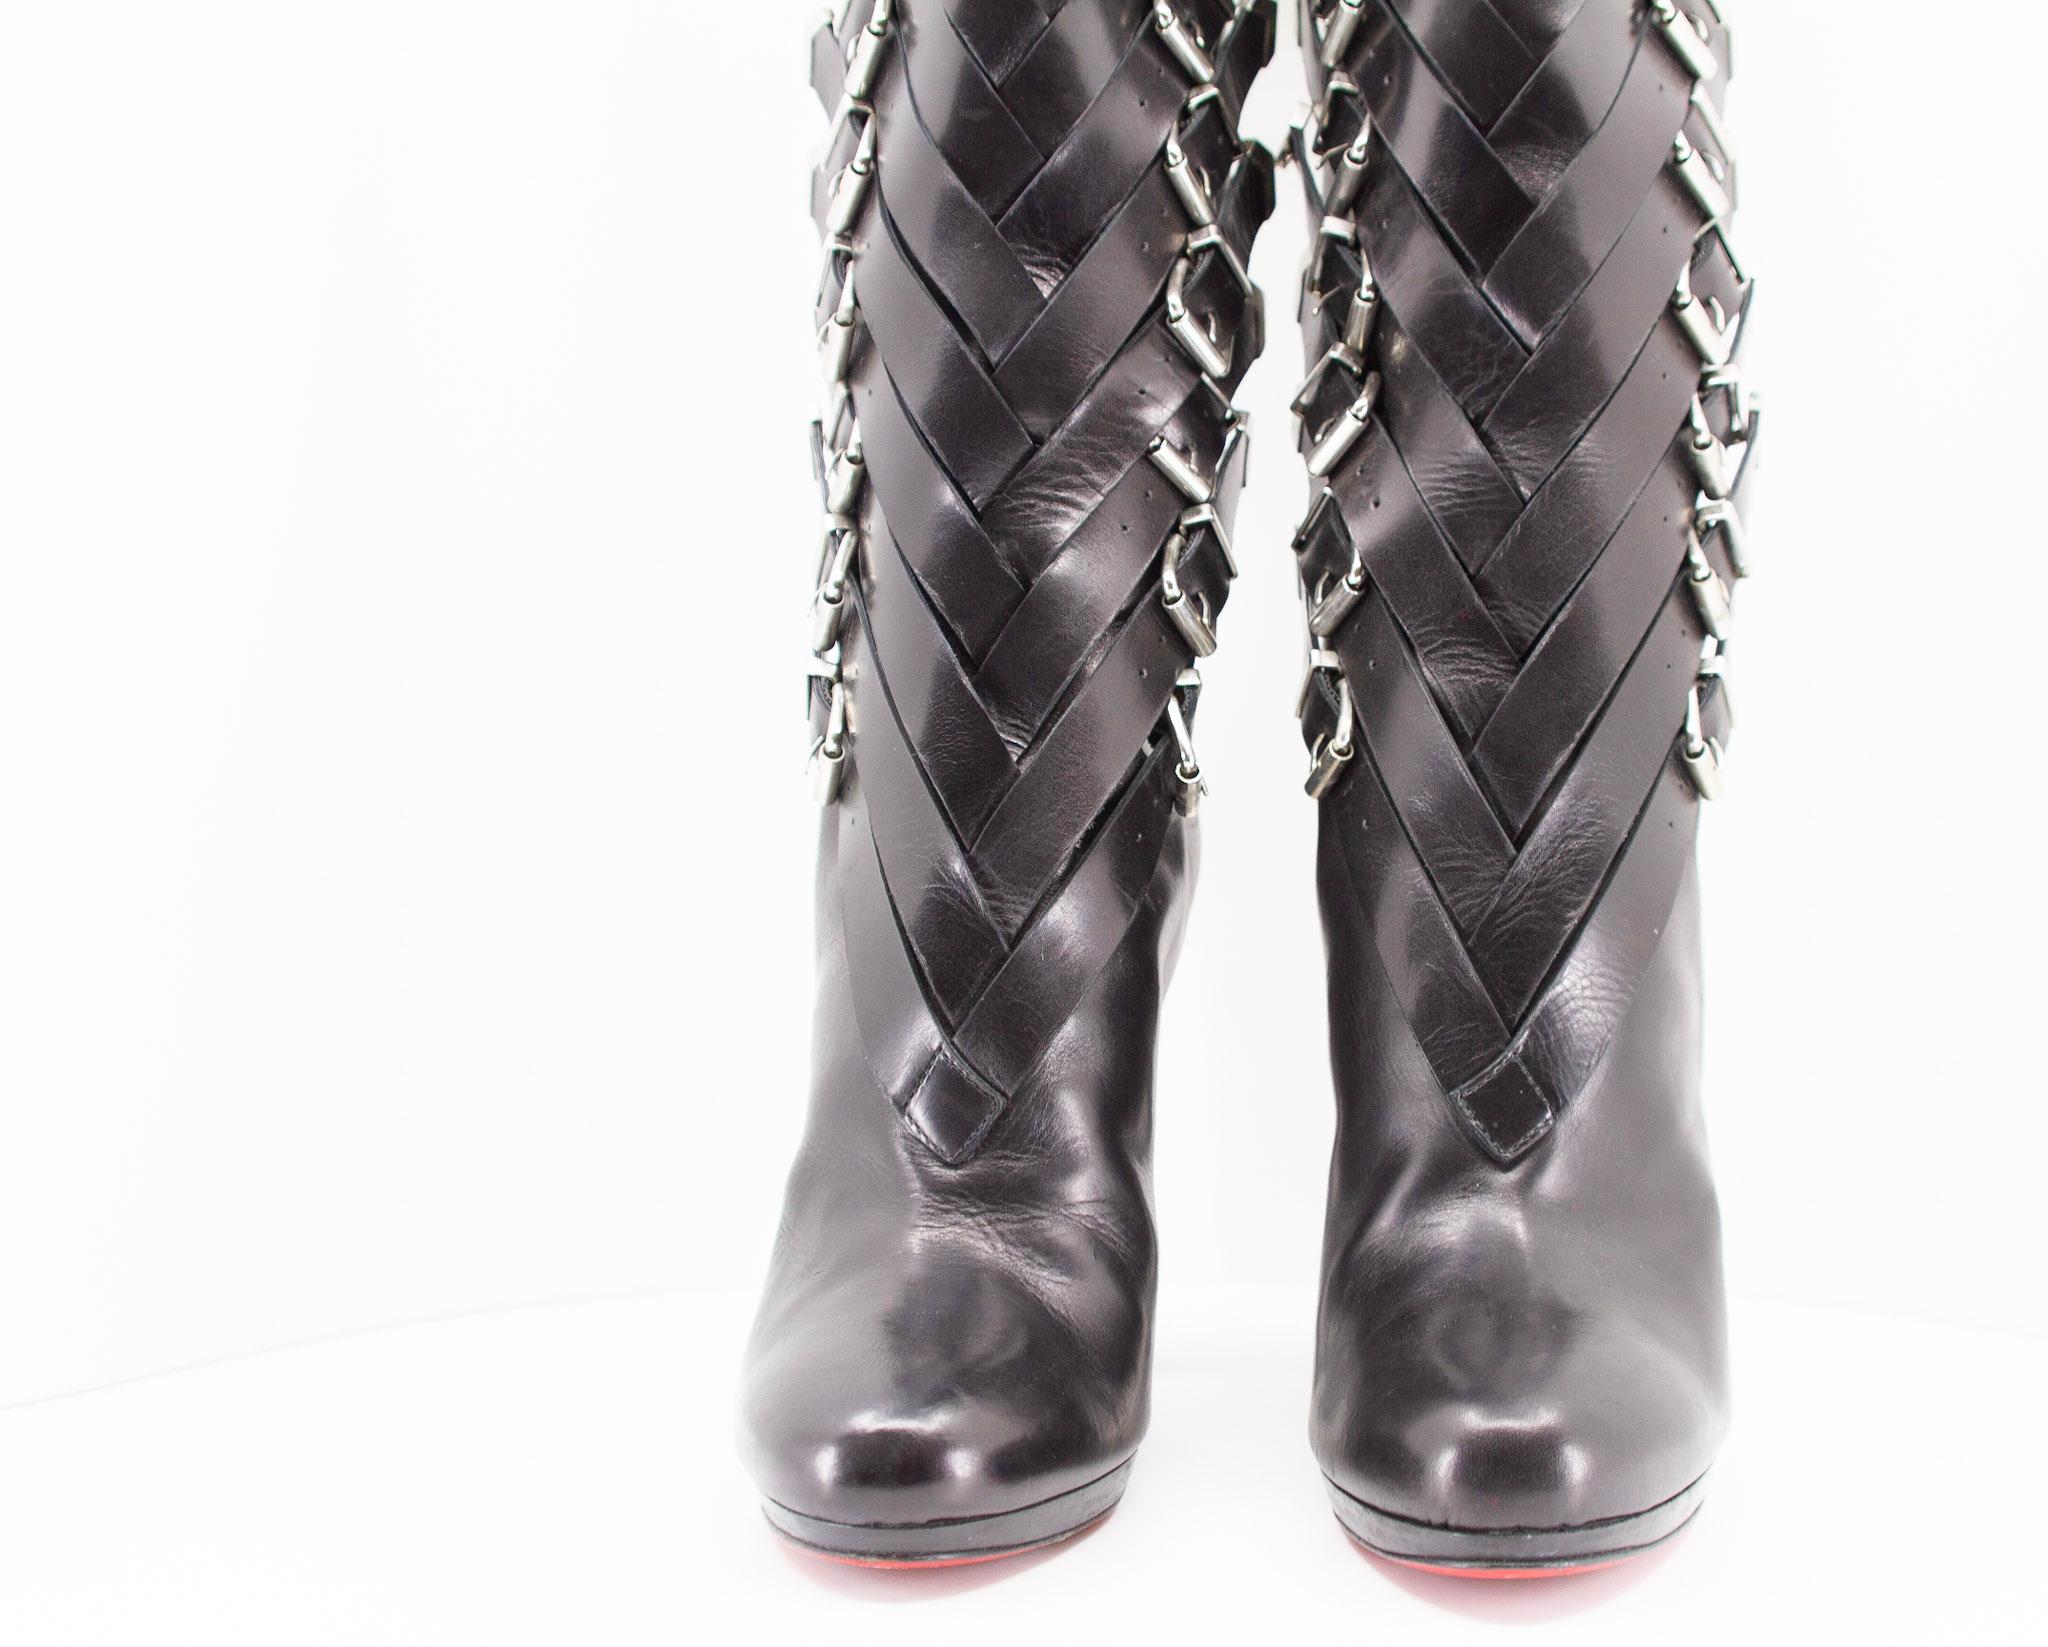 Rare Knee High Christian Louboutin Black Leather Boots For Sale 9